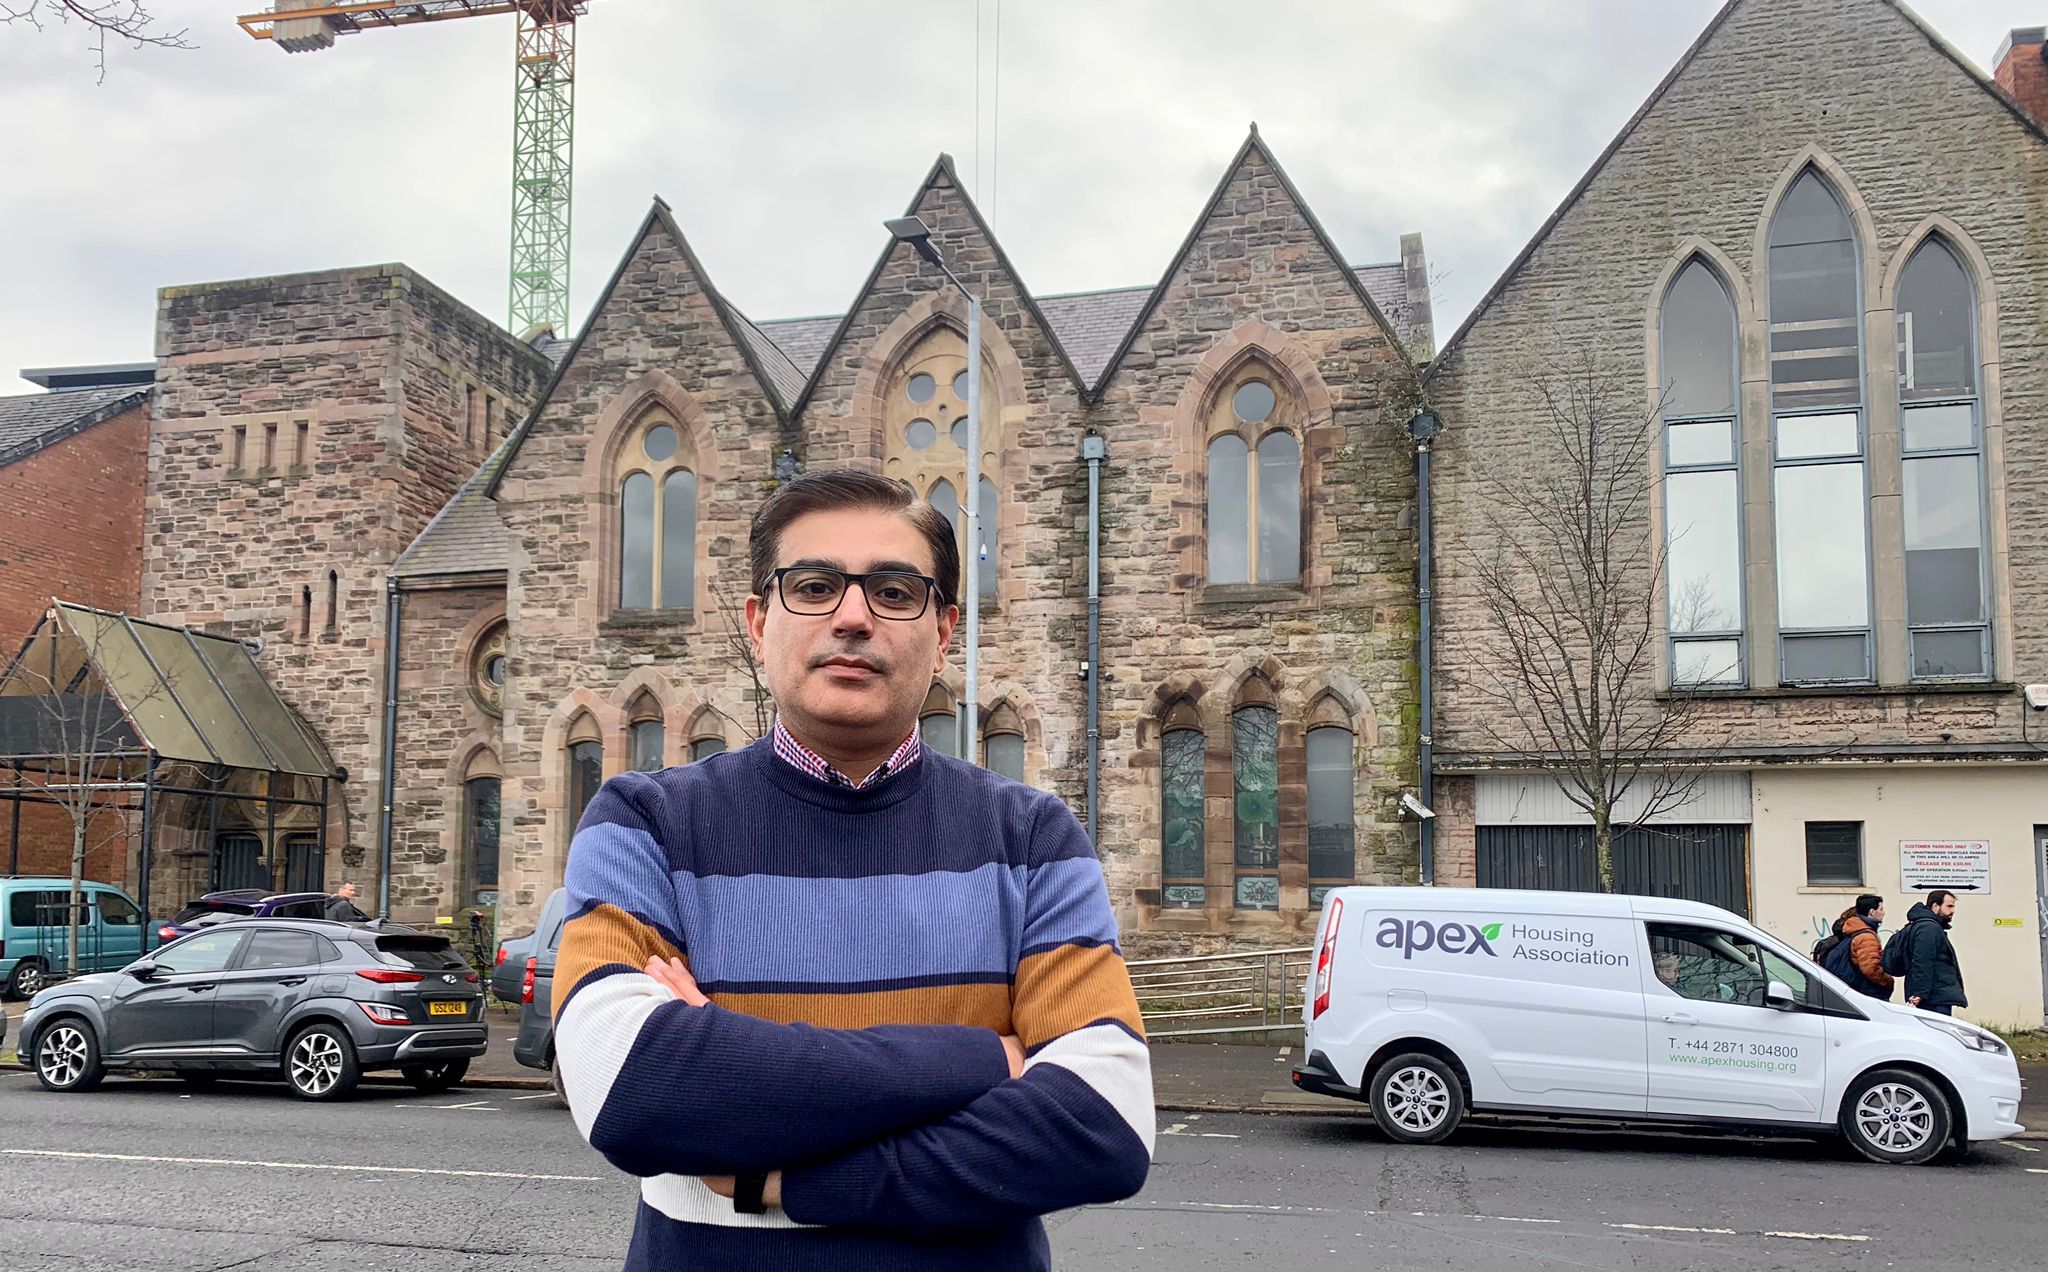 FOR SALE: Muhammad Atif, a trustee of BMCA, says the racist arson attacks have forced them to move